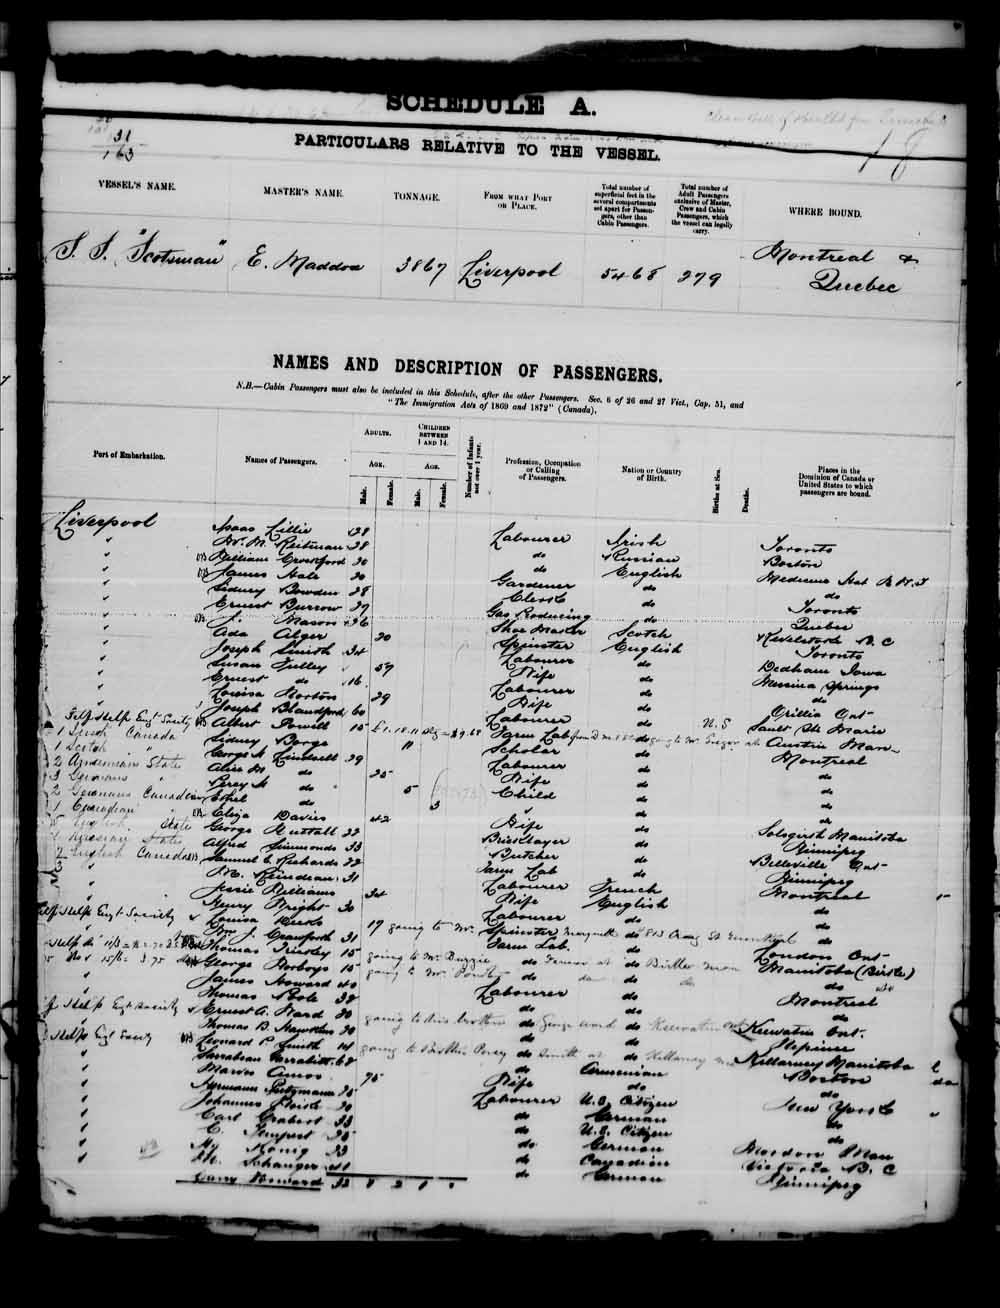 Digitized page of Quebec Passenger Lists for Image No.: e003554394